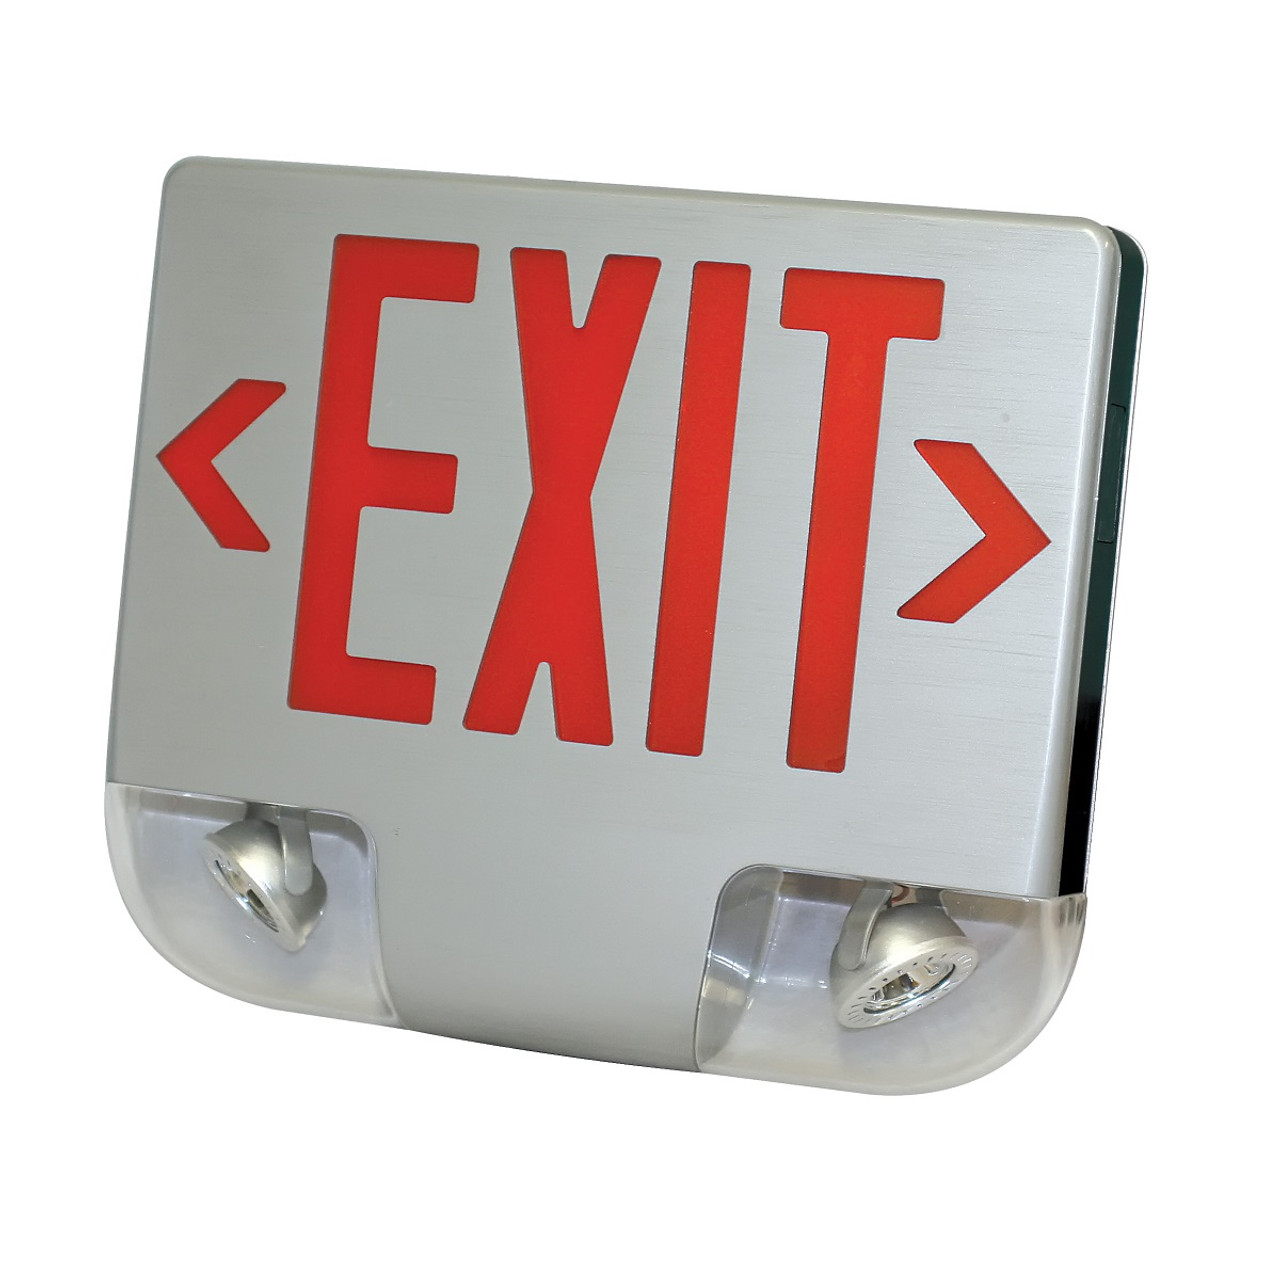 Ultra bright, energy efficient, long life Red or Green LED Exit sign illumination.
Two fully adjustable high performance premium grade, ultra bright white LED lamps.
3 watt (1 LED x 3 watts) per head.
Dual 120V/277 voltage.
Charge rate/power “ON” LED indicator light and push-to-test switch for mandated code compliance testing.
8.4V long life, maintenance-free, rechargeable NiCd battery.
Internal solid-state transfer switch automatically connects the internal battery to LED board and LED lamp heads for minimum 90-minute emergency illumination.
Fully automatic solid-state, two rate charger initiates battery charging to recharge a discharged battery in 24 hours.
Aluminum mounting canopy included for top or end mount.
Universal knockout pattern on back plate for wall mount.